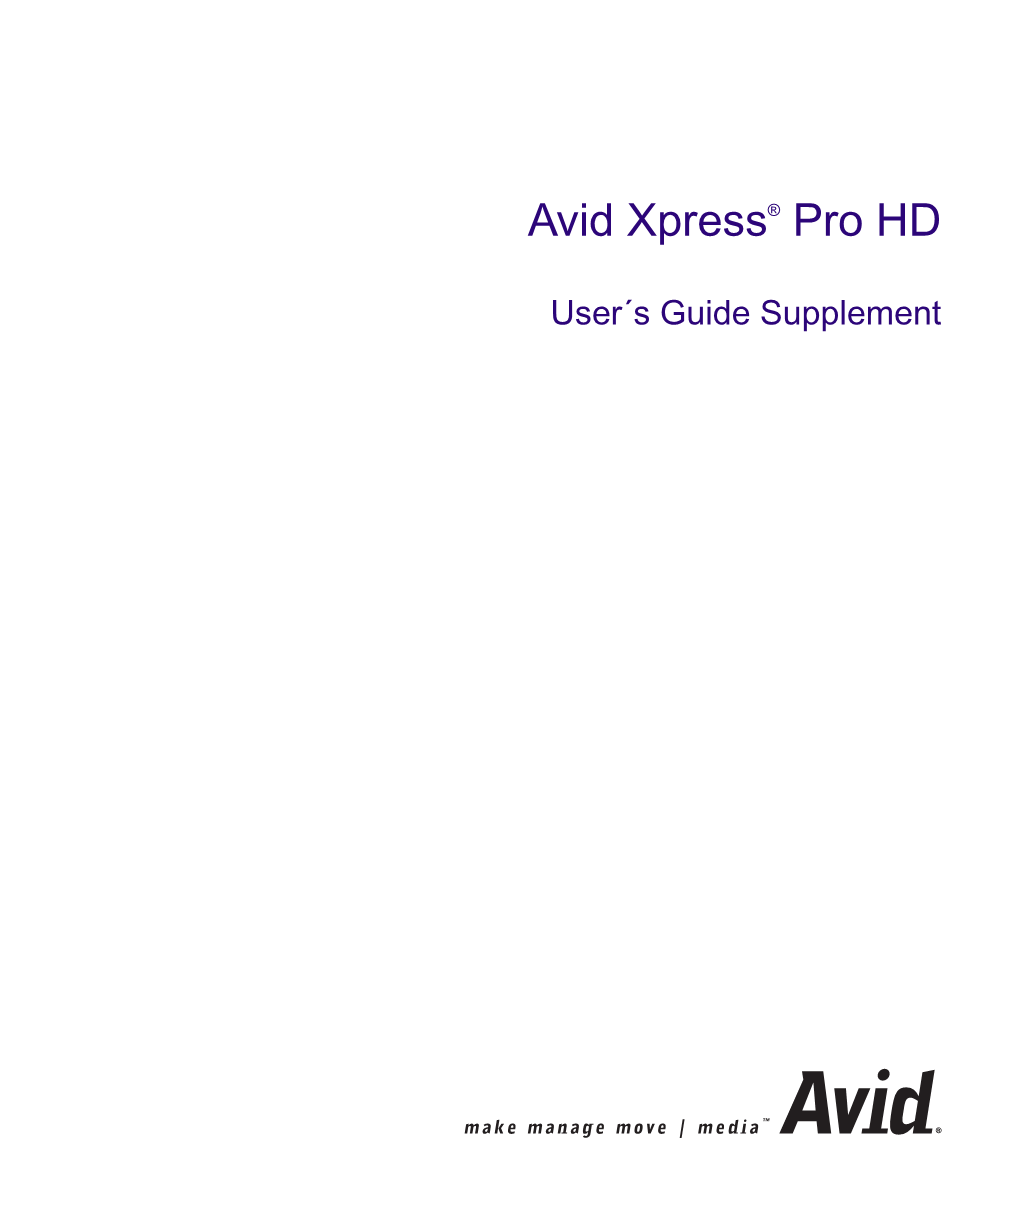 Avid Xpress Pro HD User's Guide Supplement